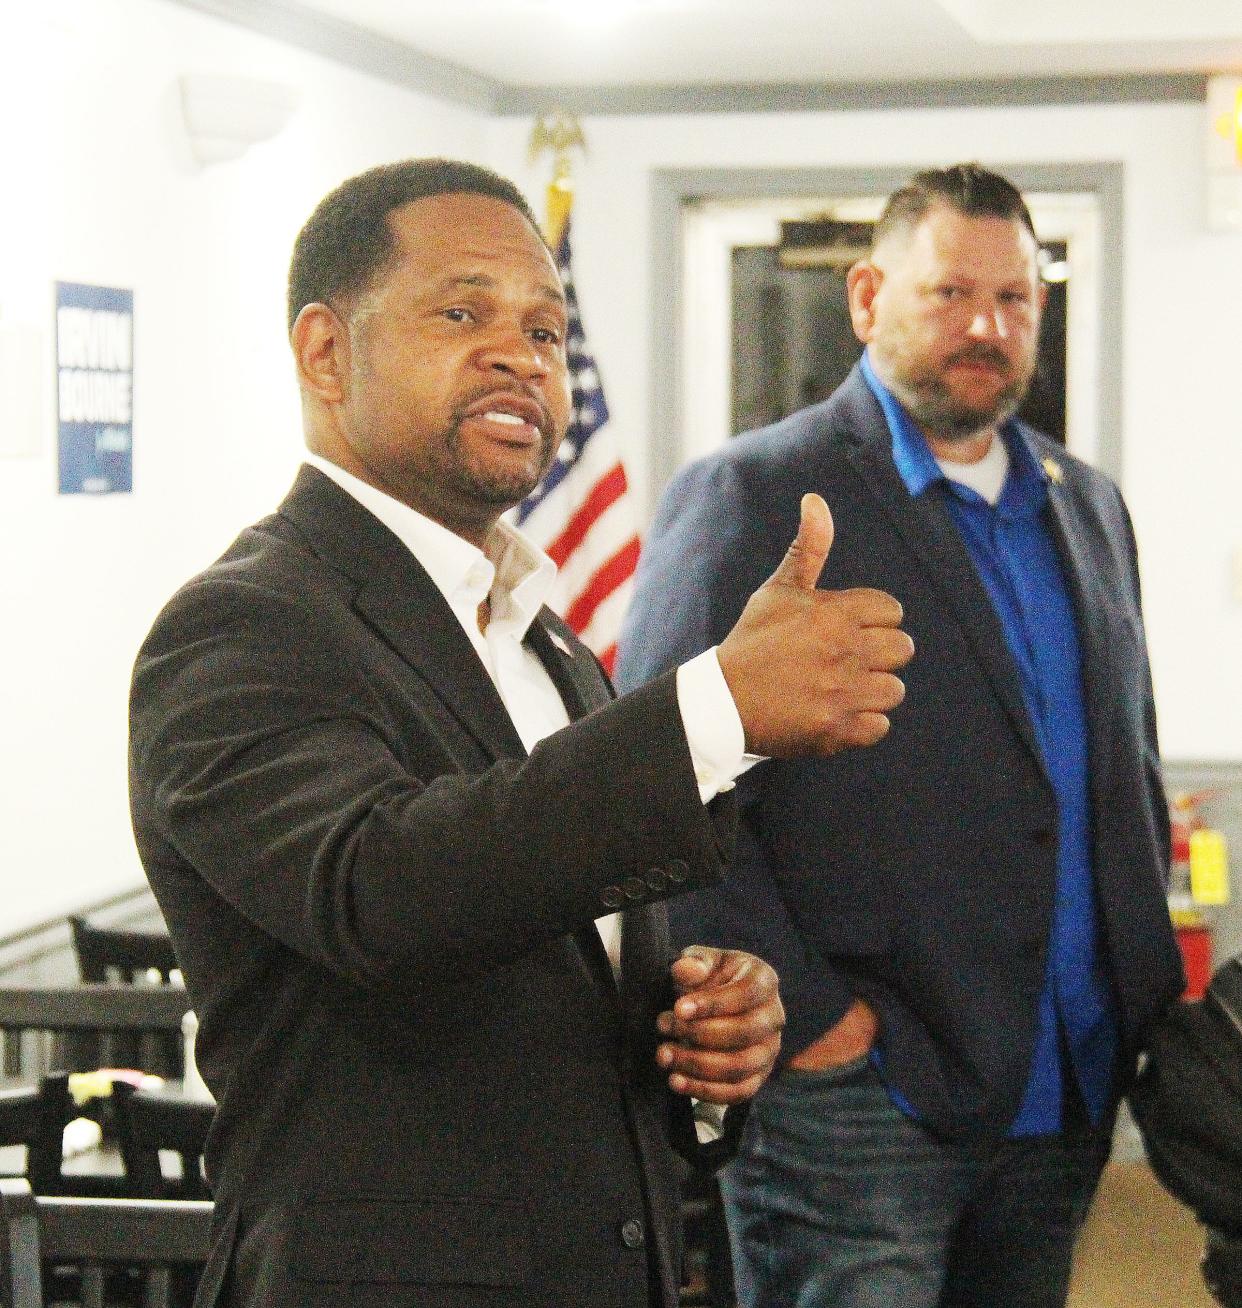 Aurora Mayor and Republican candidate for governor Richard Irvin speaks to the audience at a gathering at Pontiac Family Restaurant Saturday morning. Looking on is Livingston County Sheriff Jeff Hamilton.